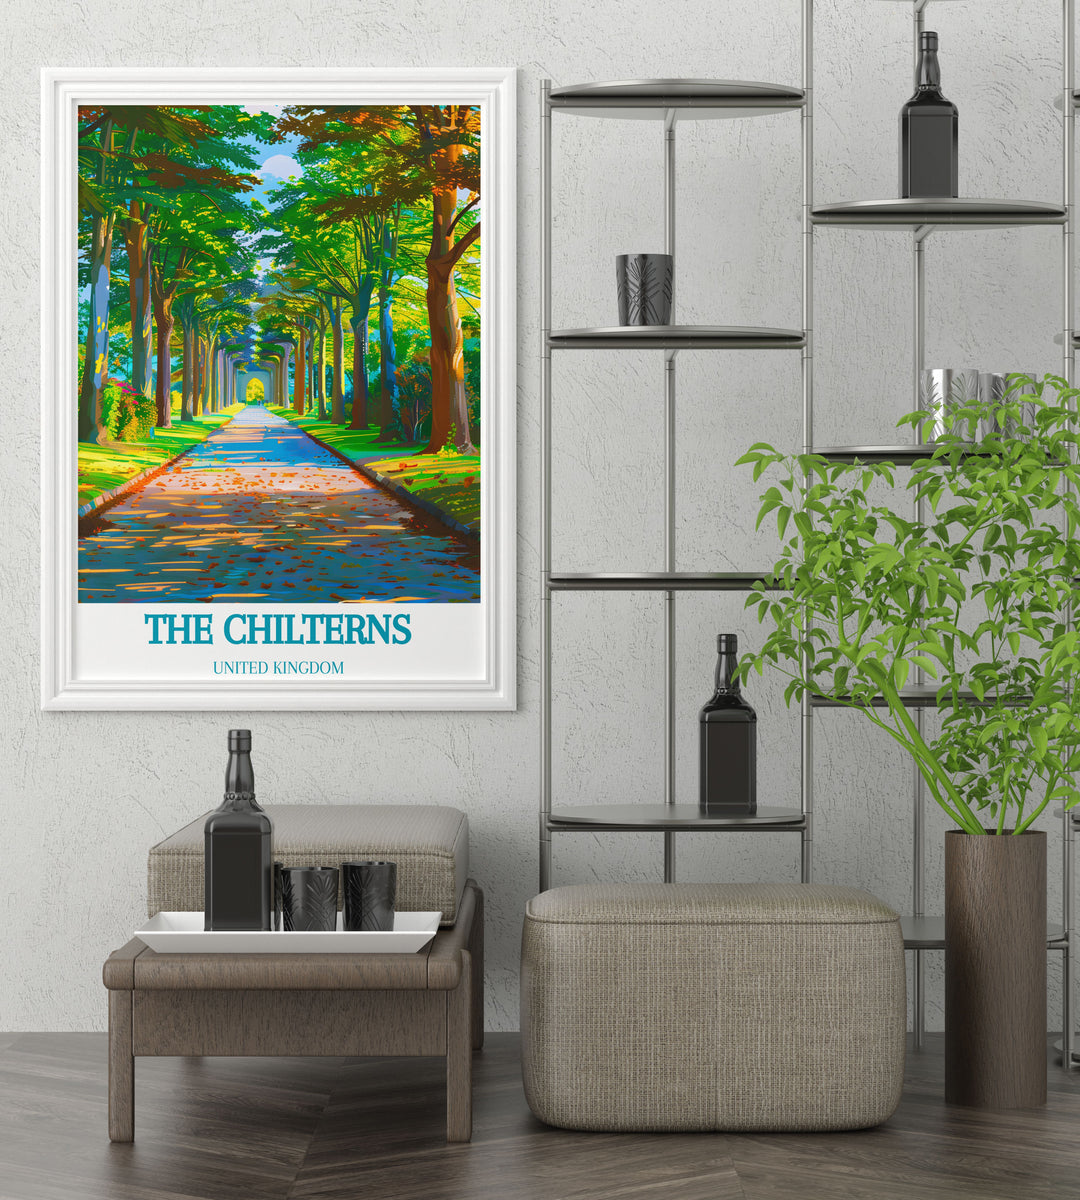 Vintage UK Prints featuring classic views of The Chilterns, offering a nostalgic glimpse into the scenic and historic landmarks of this beloved British region with beautiful and timeless artwork.